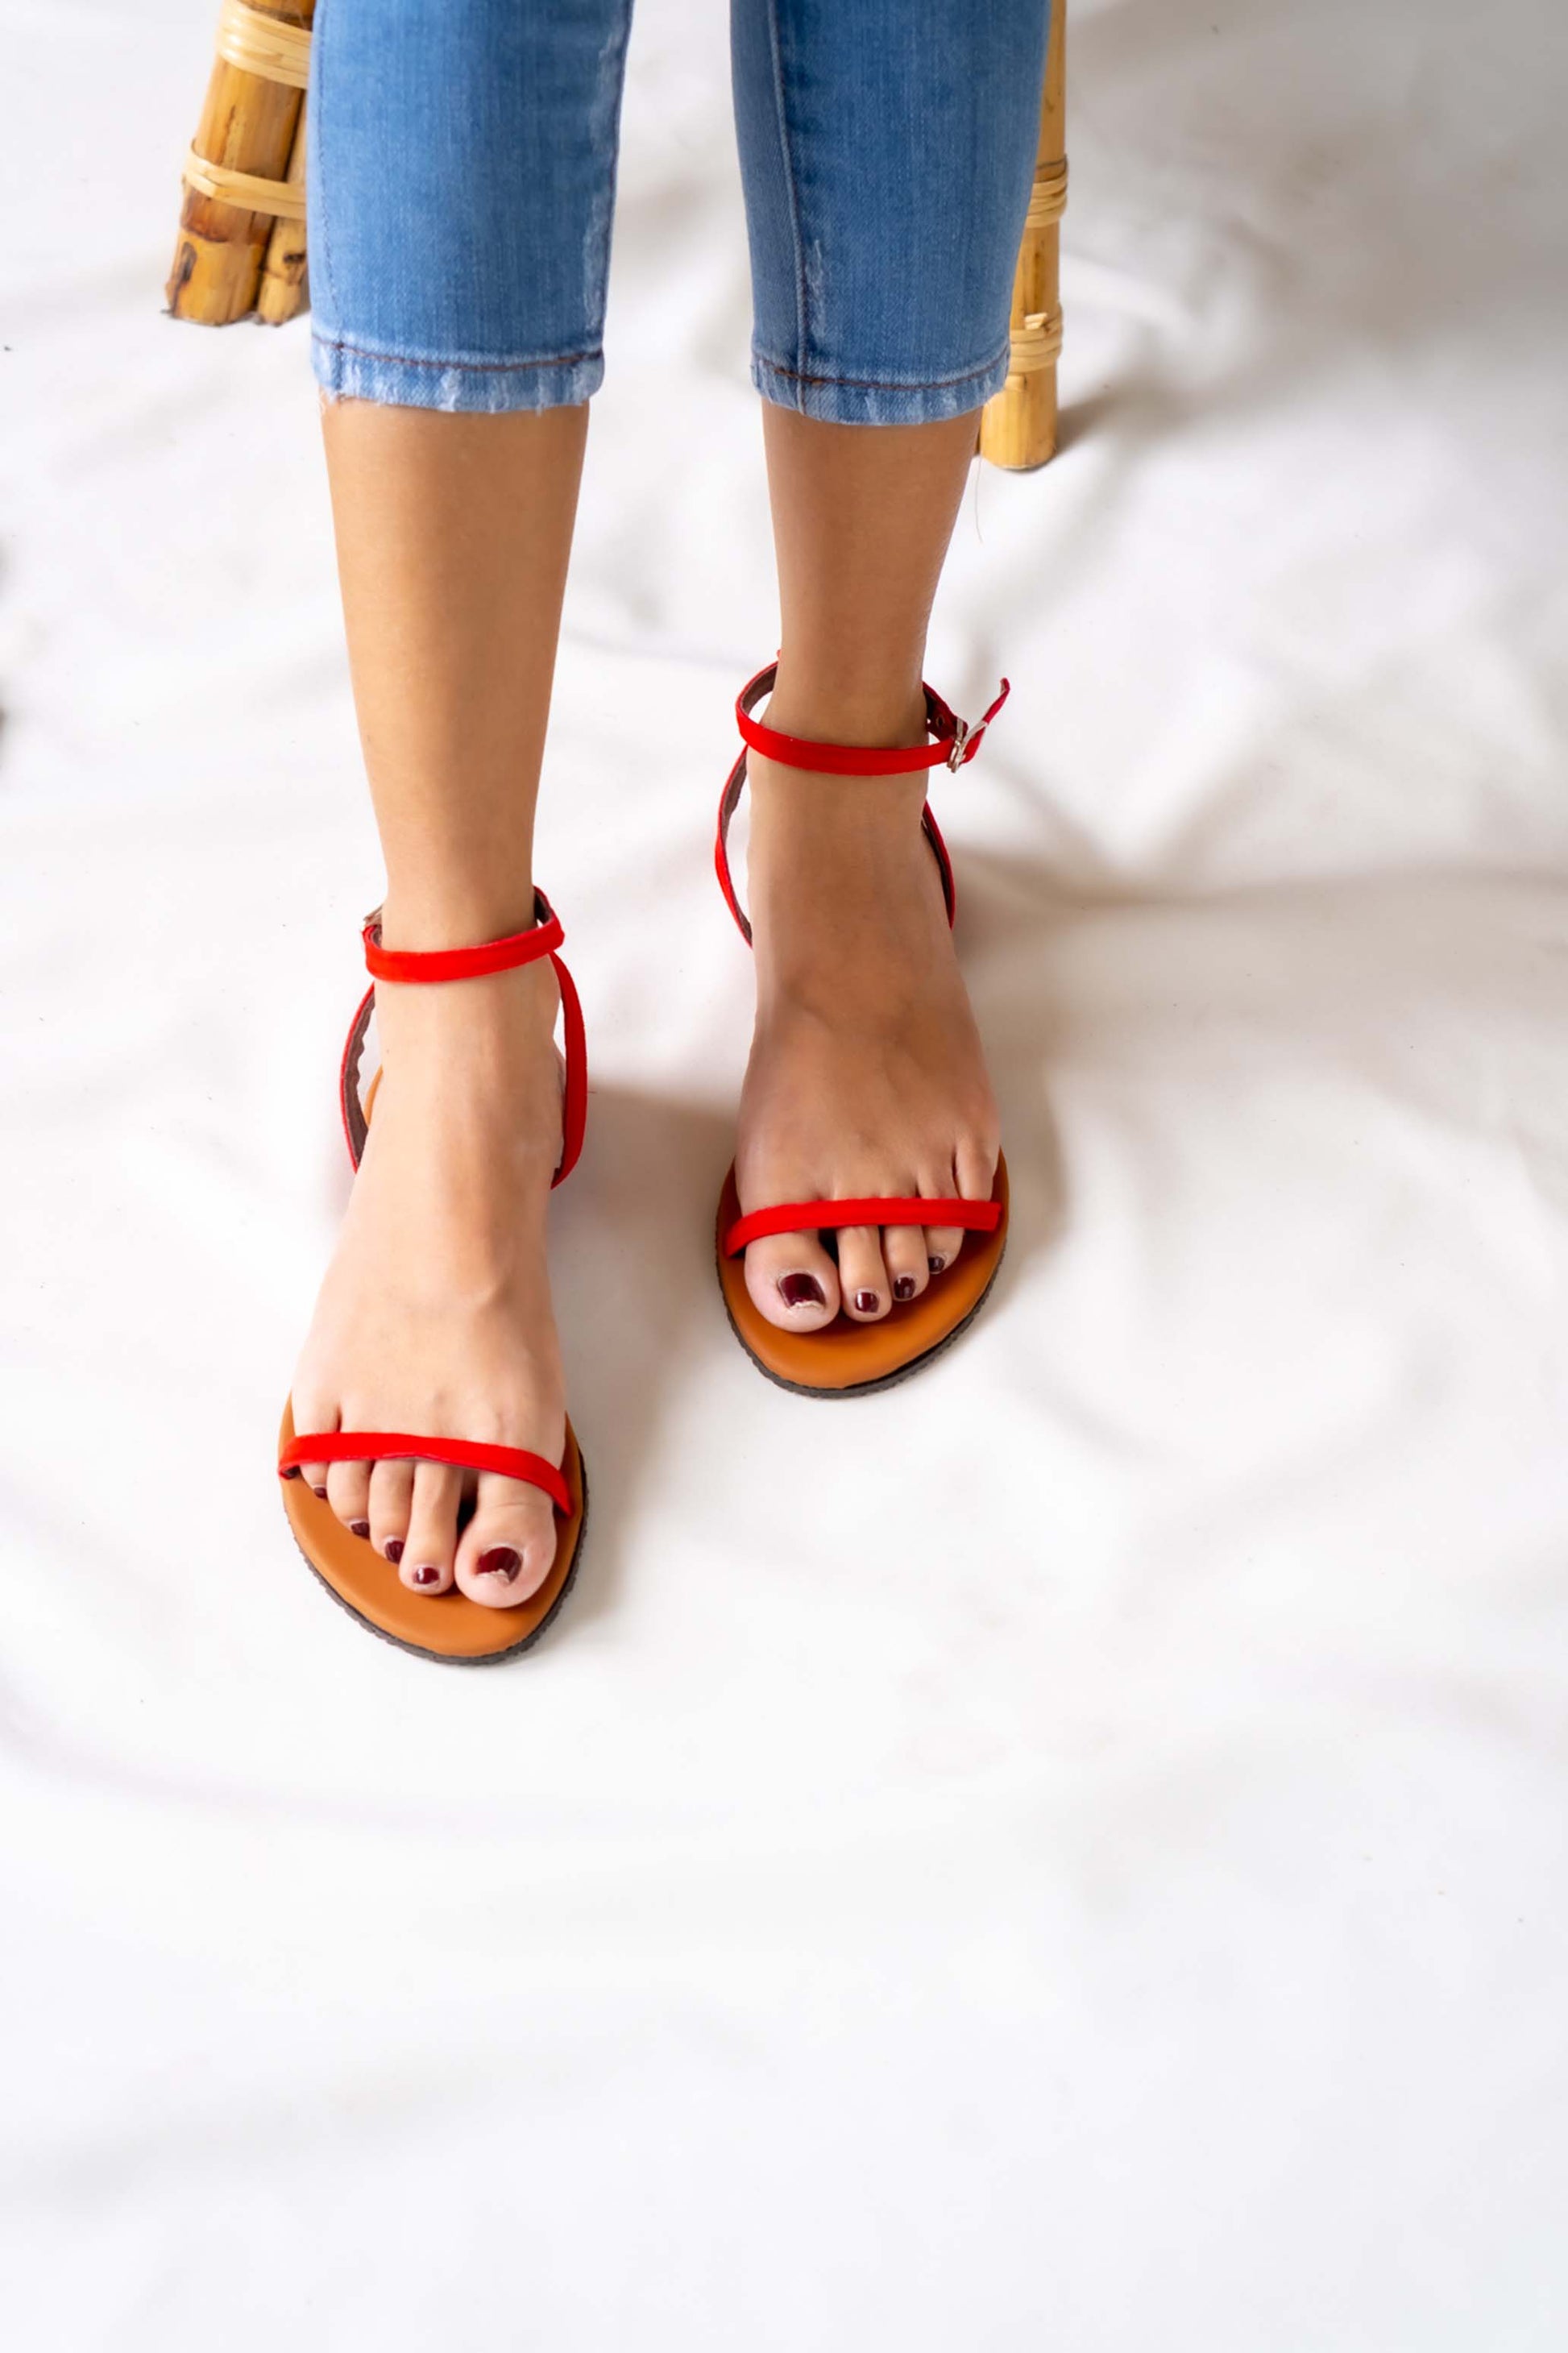 Sunny and stylish, this ladies' red flat sandal brings a pop of color to any outfit